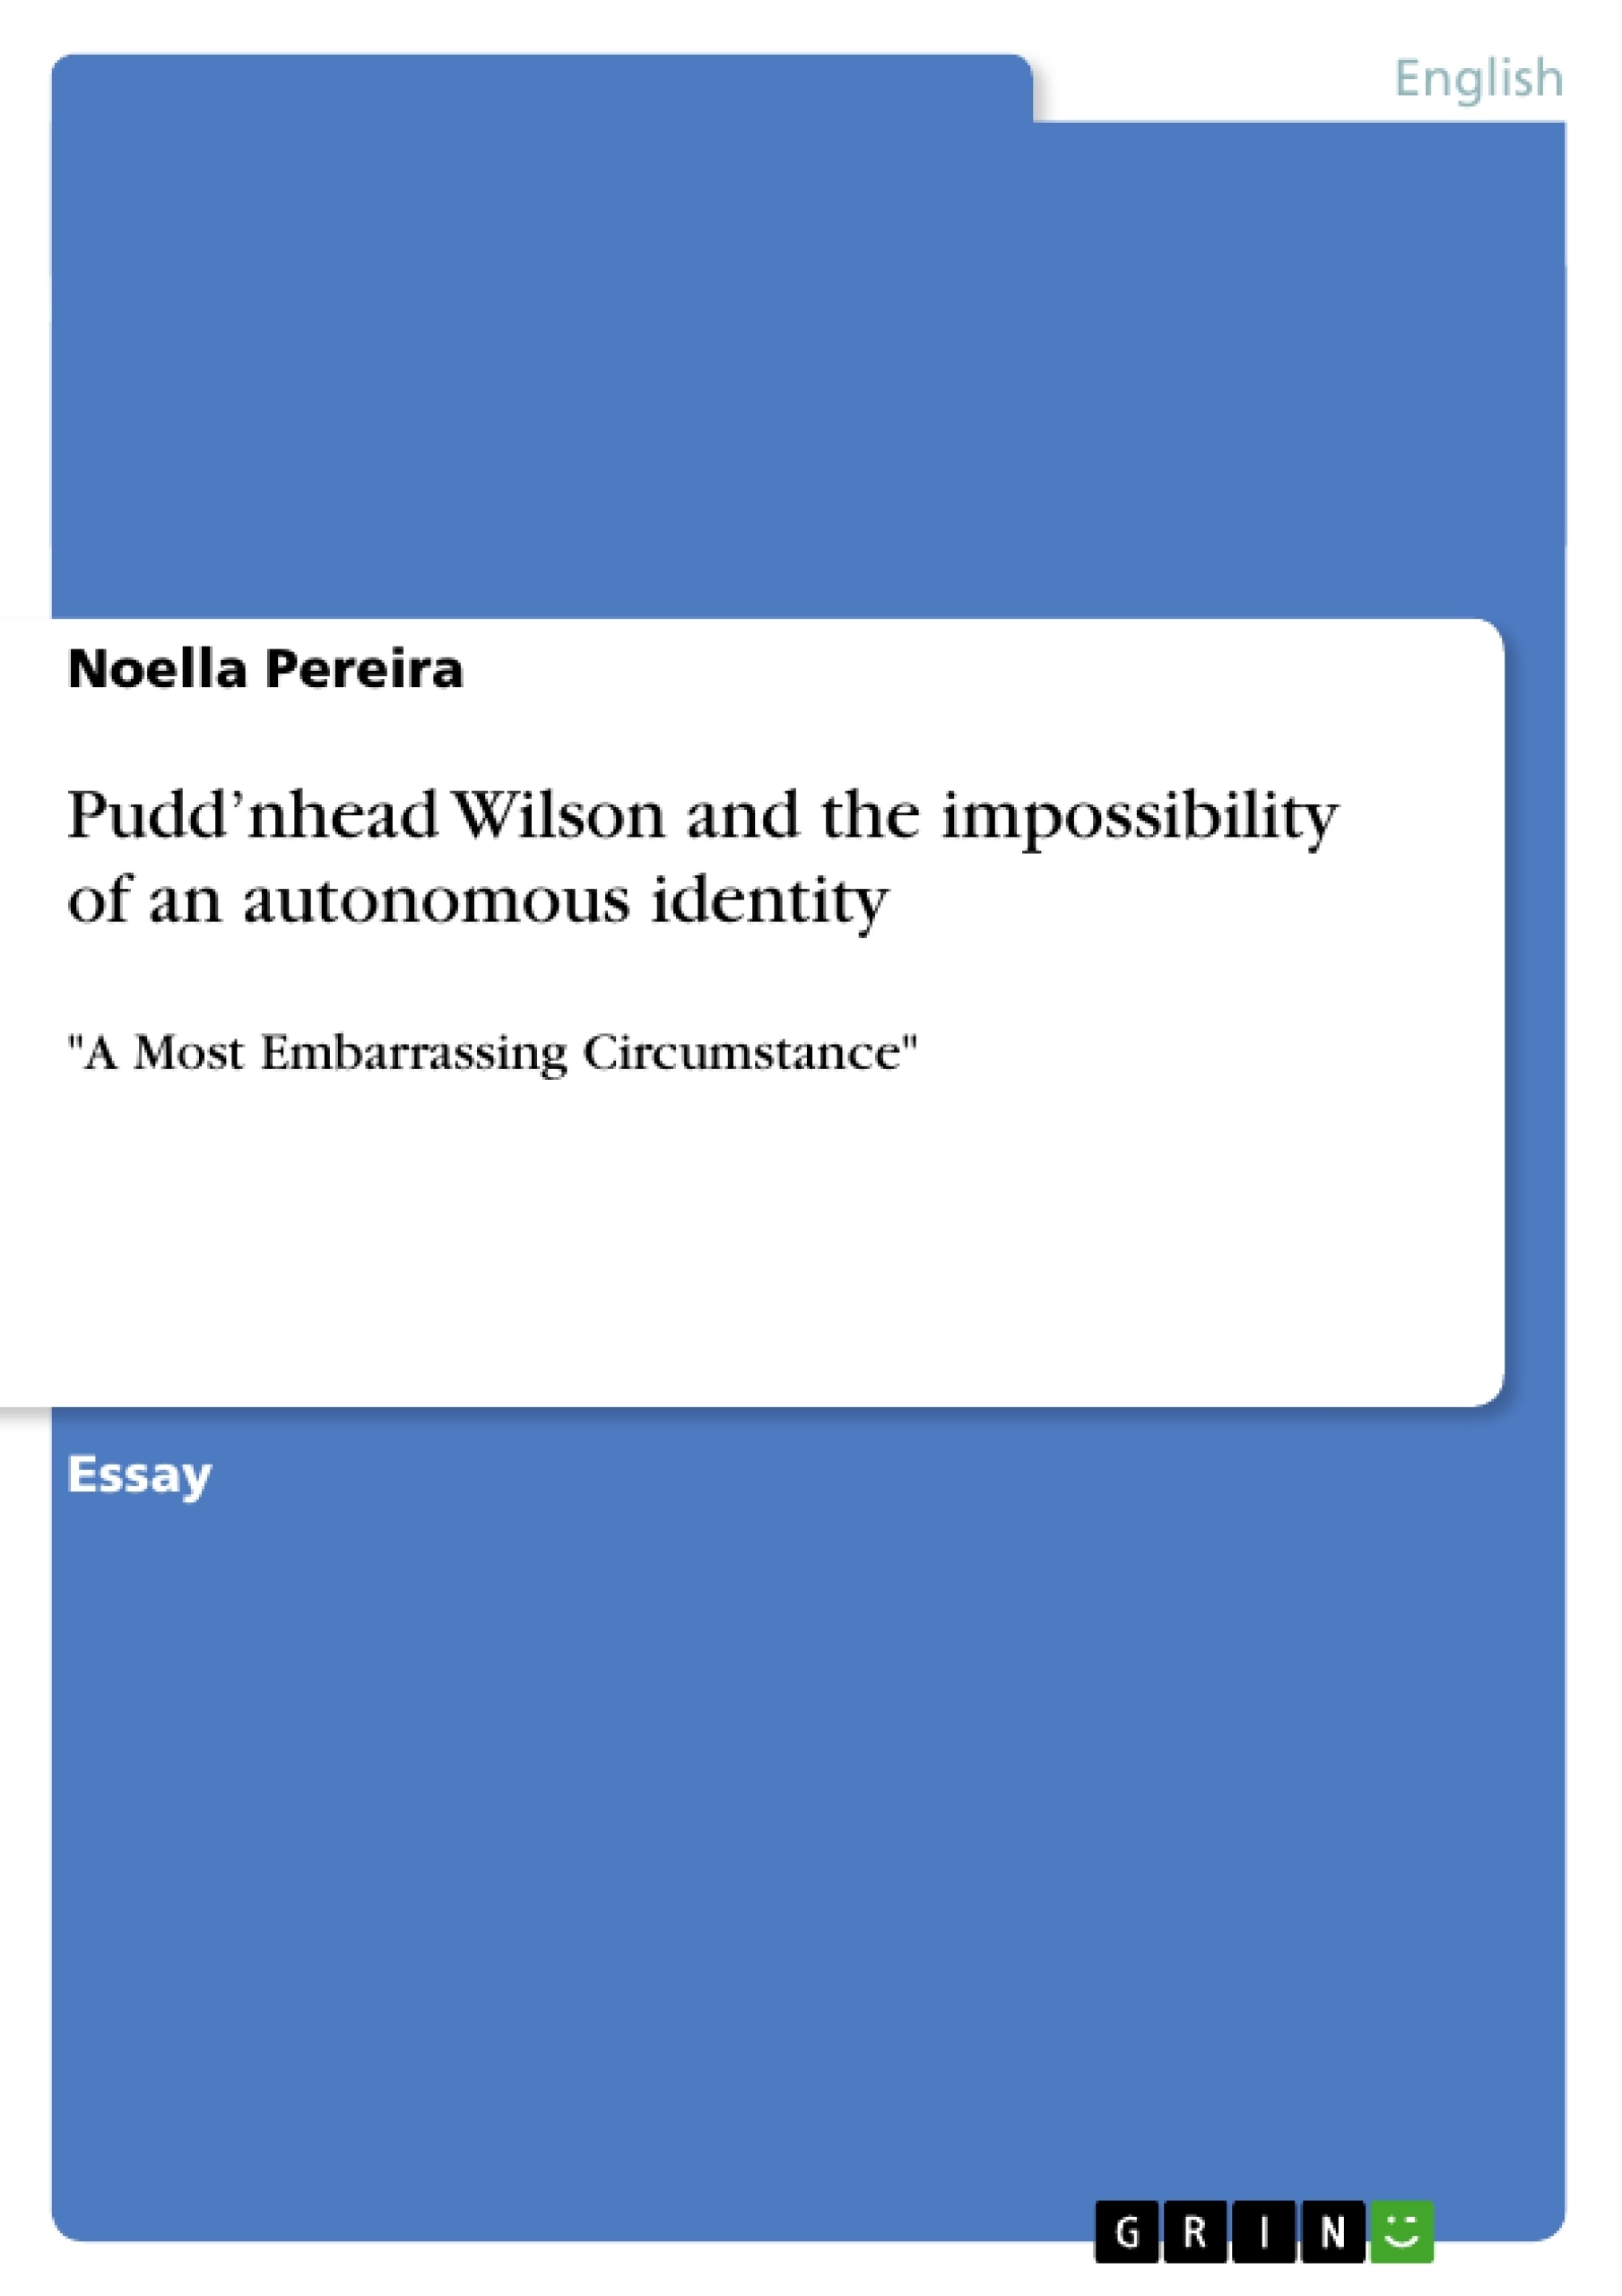 Título: Pudd’nhead Wilson and the impossibility of an autonomous identity